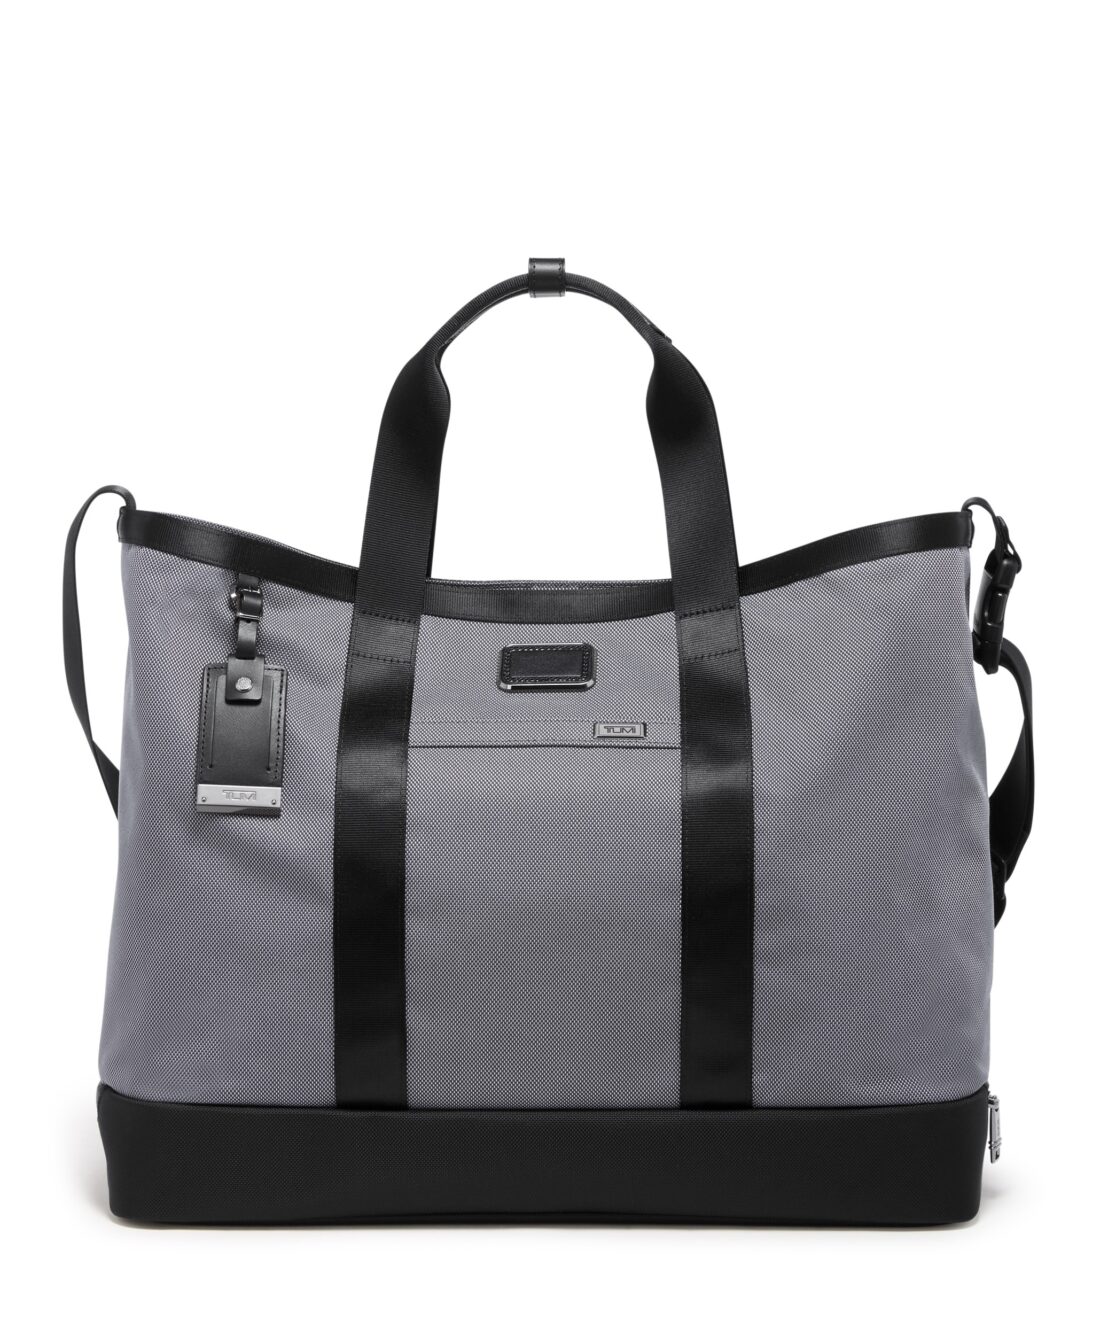 Alpha X Carryall Tote in Meteor Grey.